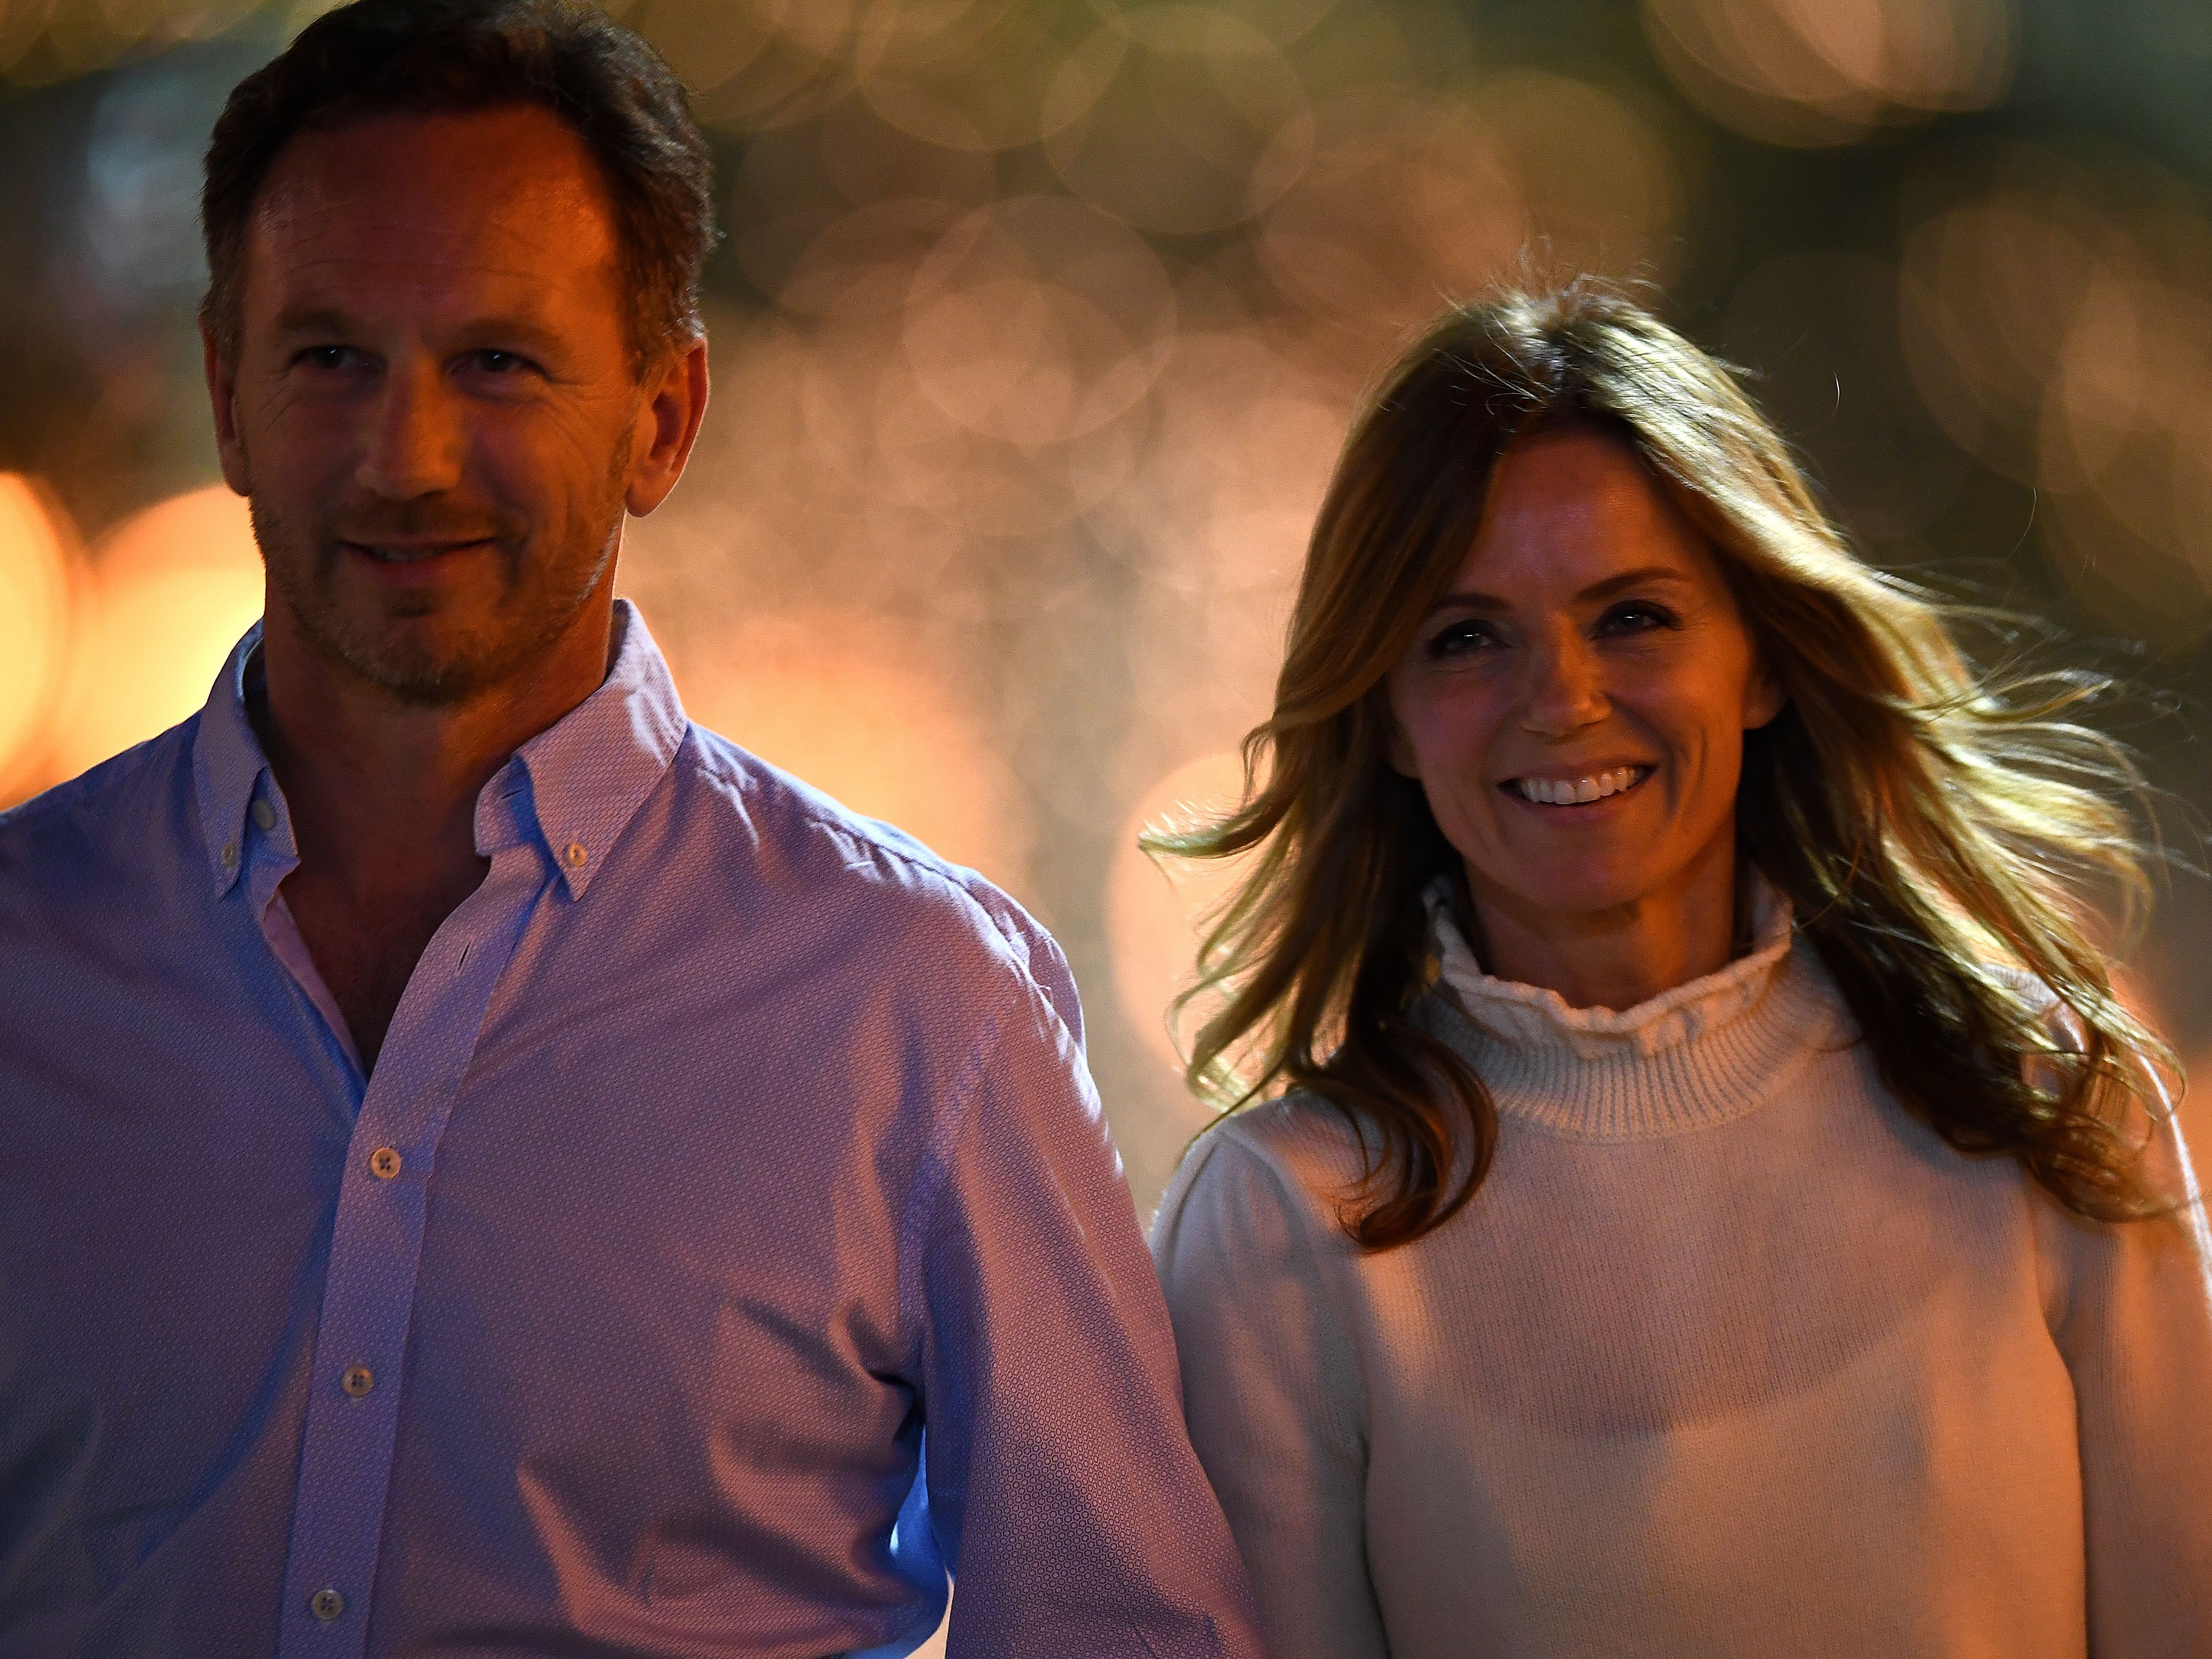 Red Bull Racing Team Principal Christian Horner and his wife Geri walk in the paddock after practice for the 2019 F1 Bahrain Grand Prix. (Photo by Clive Mason/Getty Images)